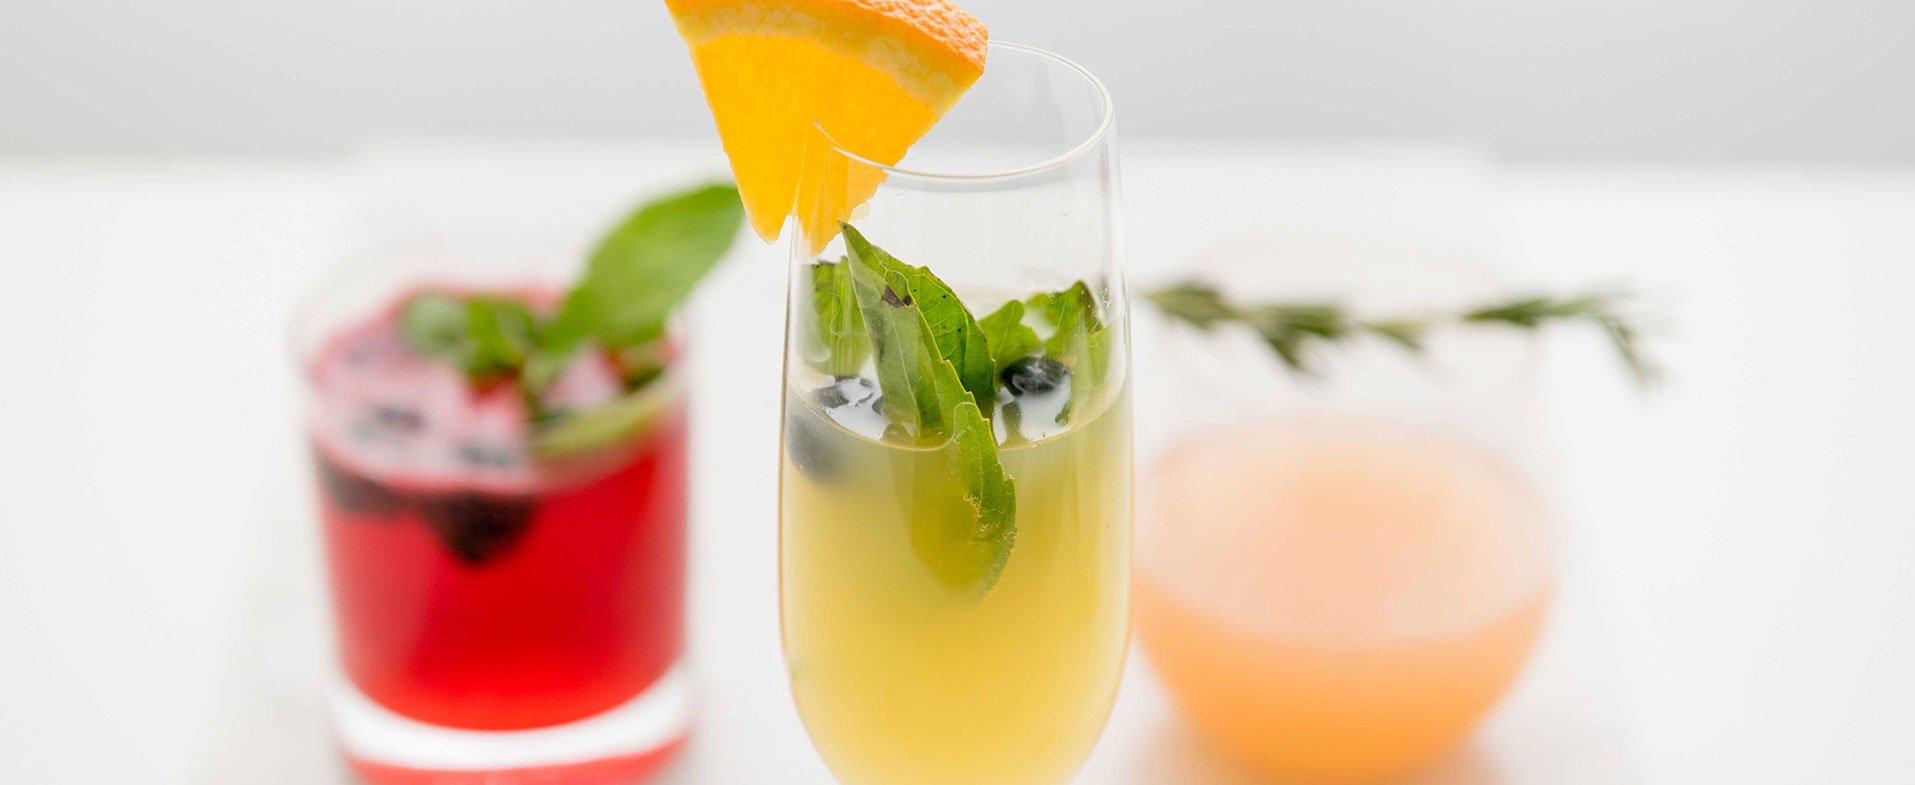 28 Best Mocktails & Non-Alcoholic Mixed Drinks